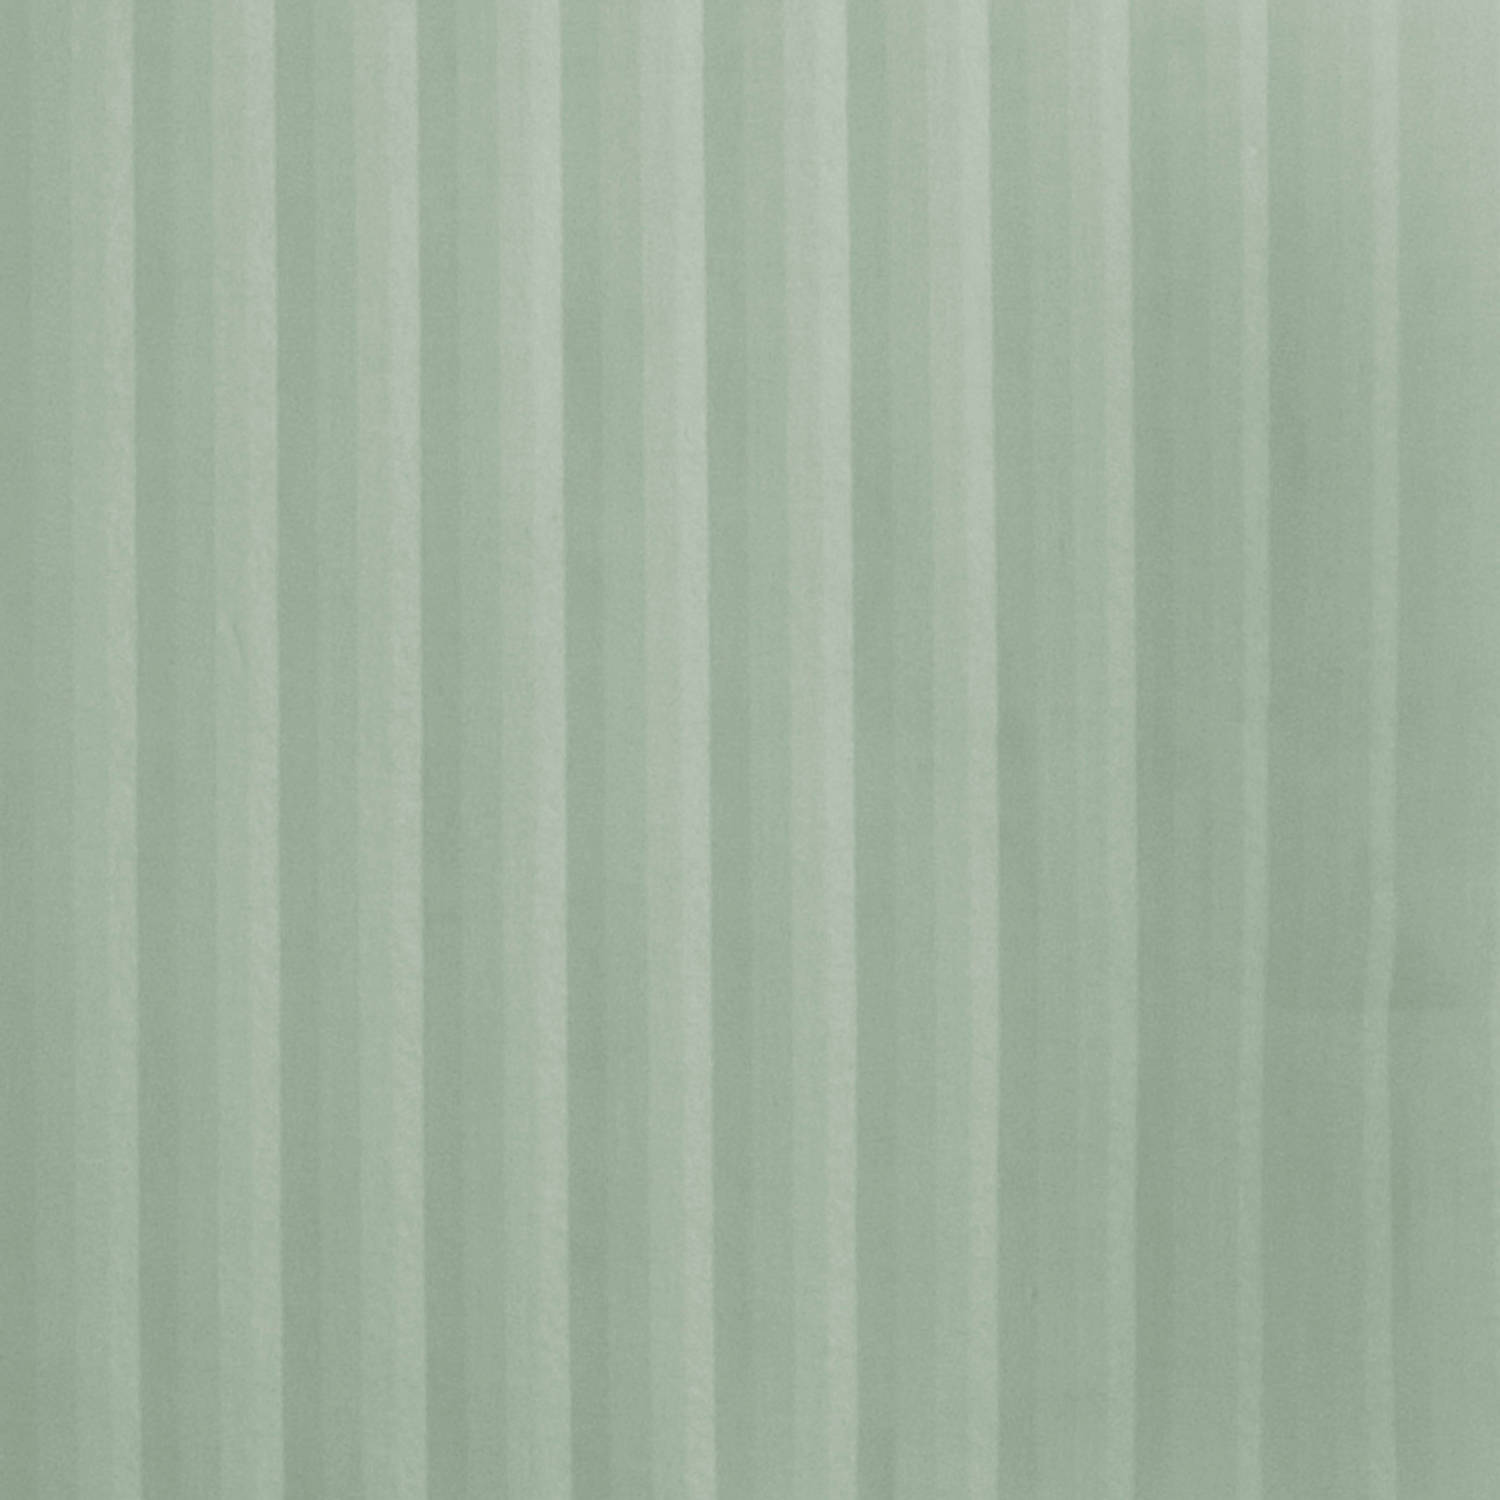 Better Homes and Gardens Elise Woven Stripe Sheer Window Panel - image 2 of 3